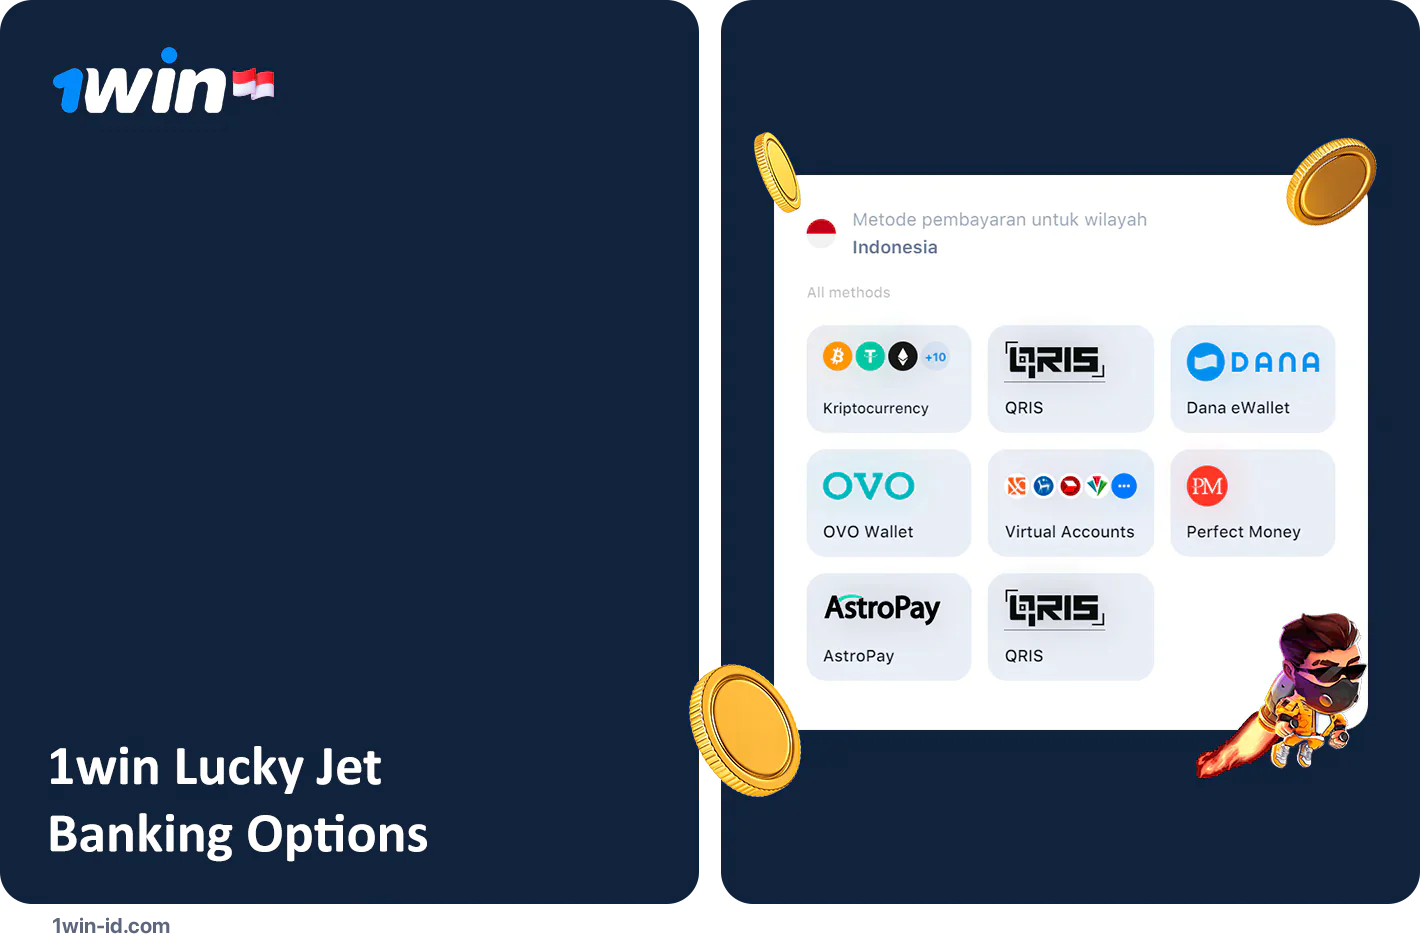 1Win Lucky Jet Banking options for Indonesia